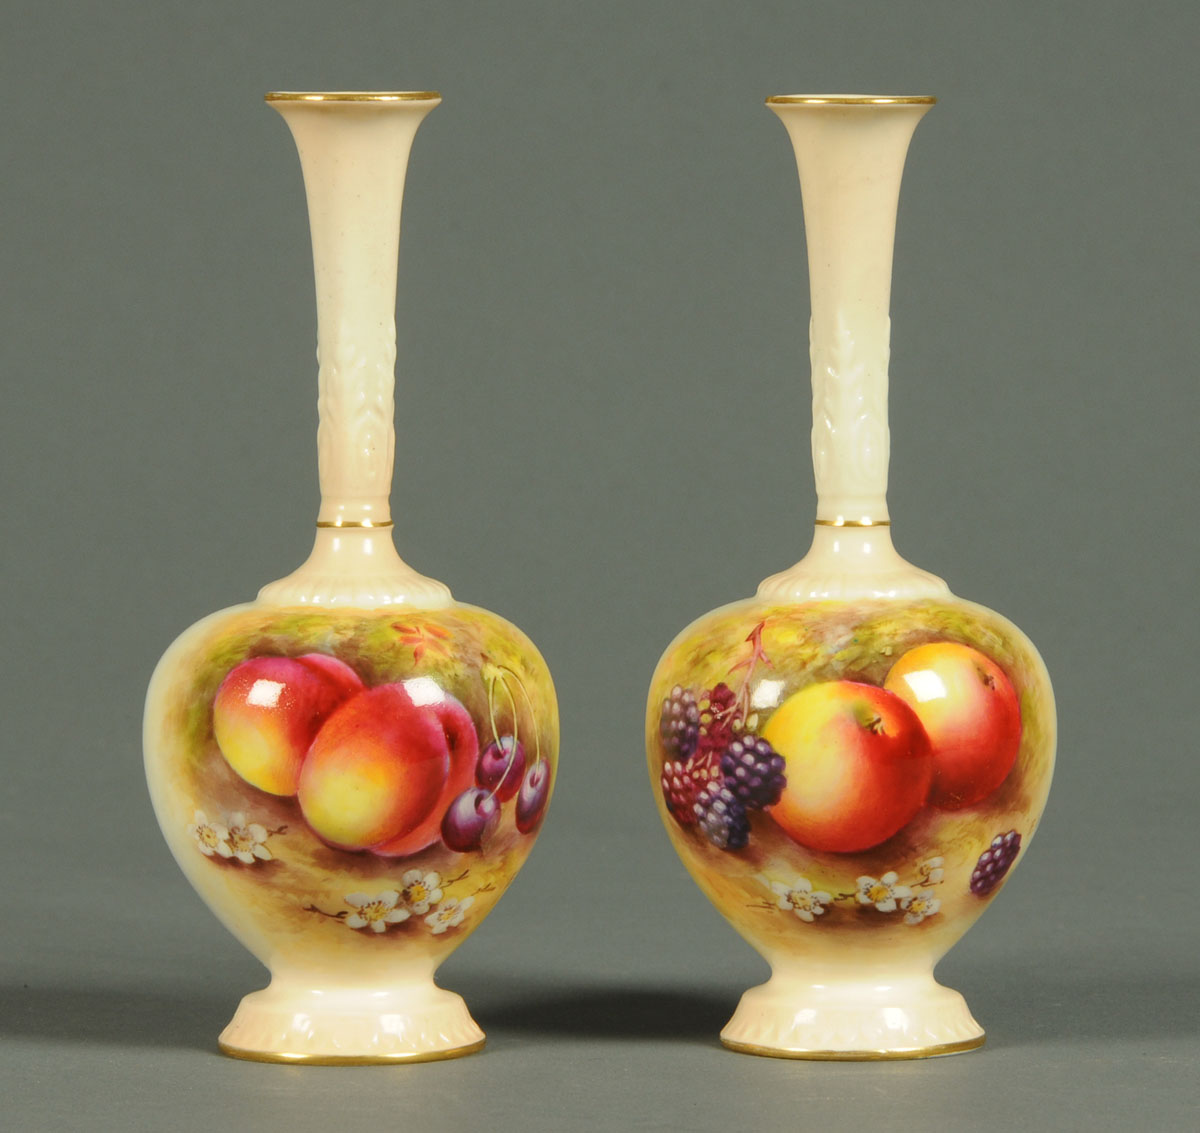 A pair of Royal Worcester vases, handpainted with autumn fruits by E. Townsend, puce mark to